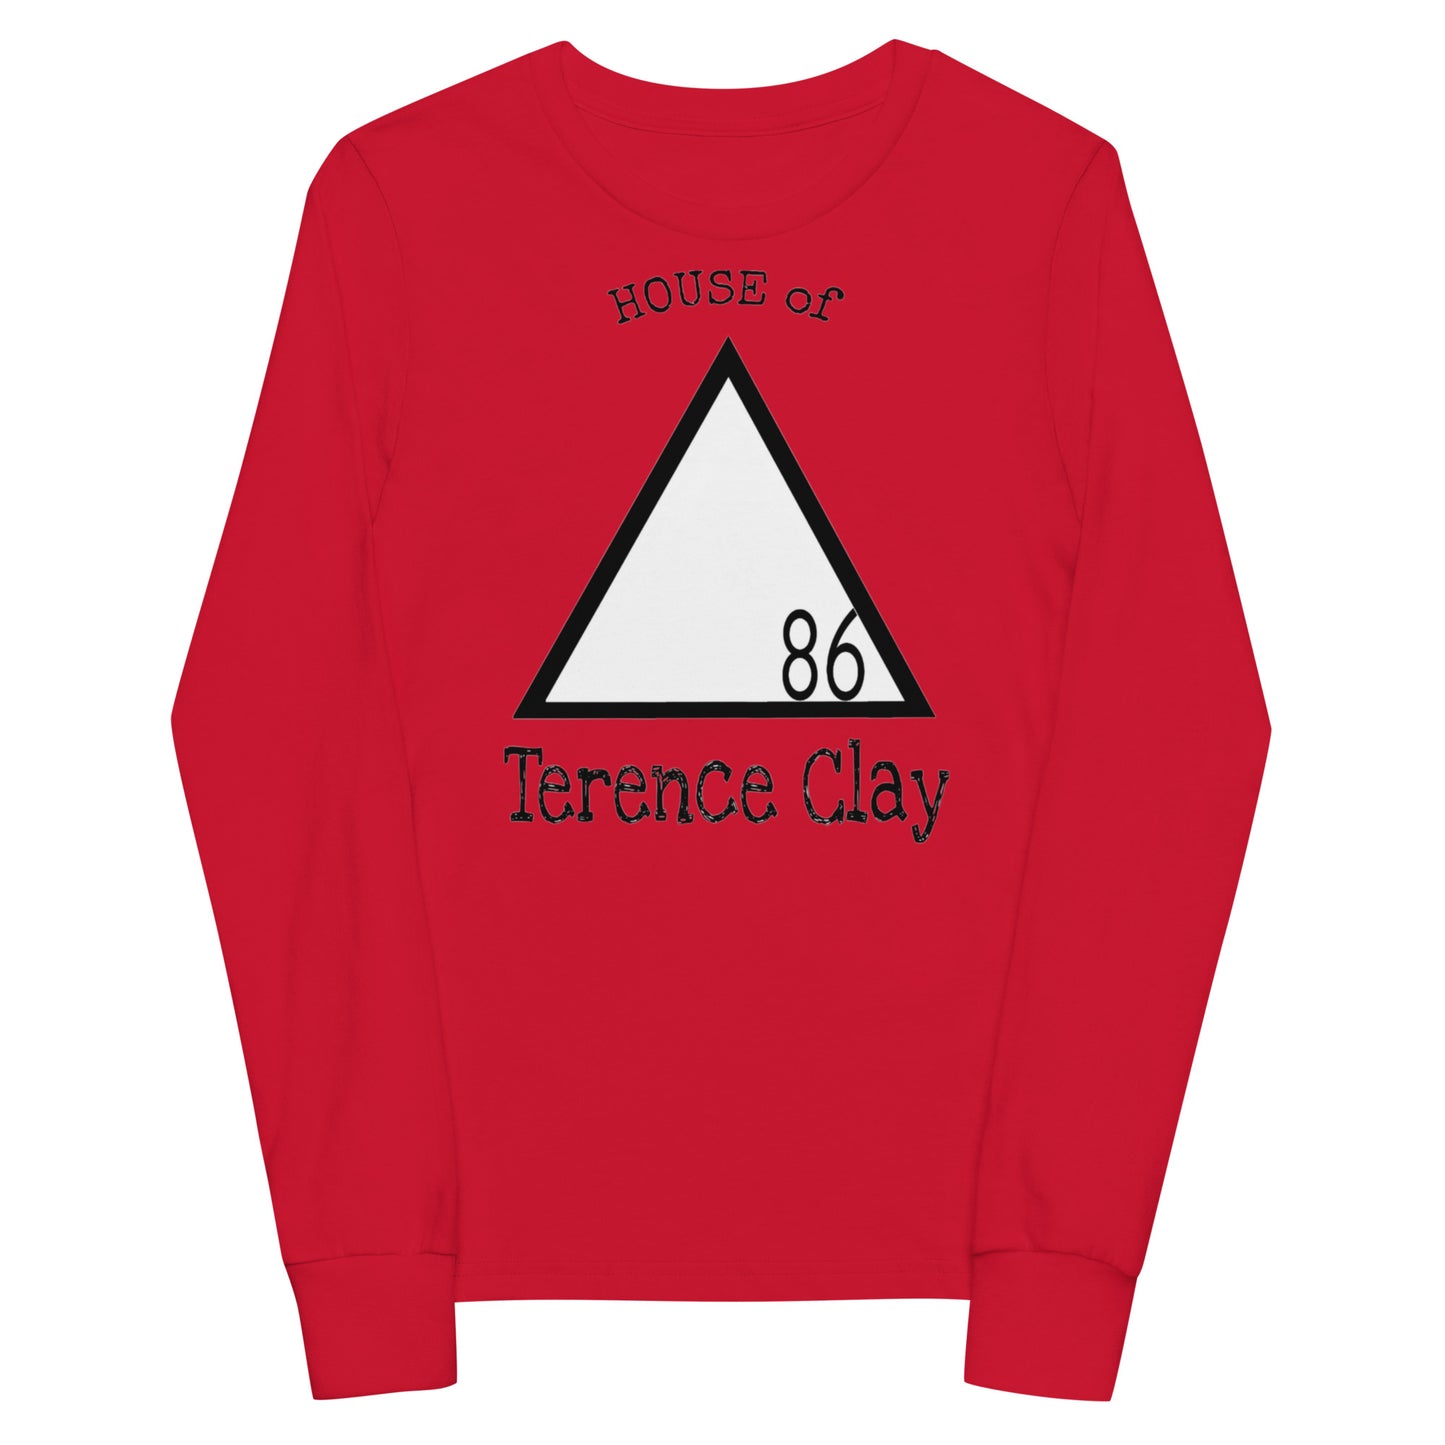 "HOUSE of Terence Clay logo" Youth Size Long-Sleeve Shirt